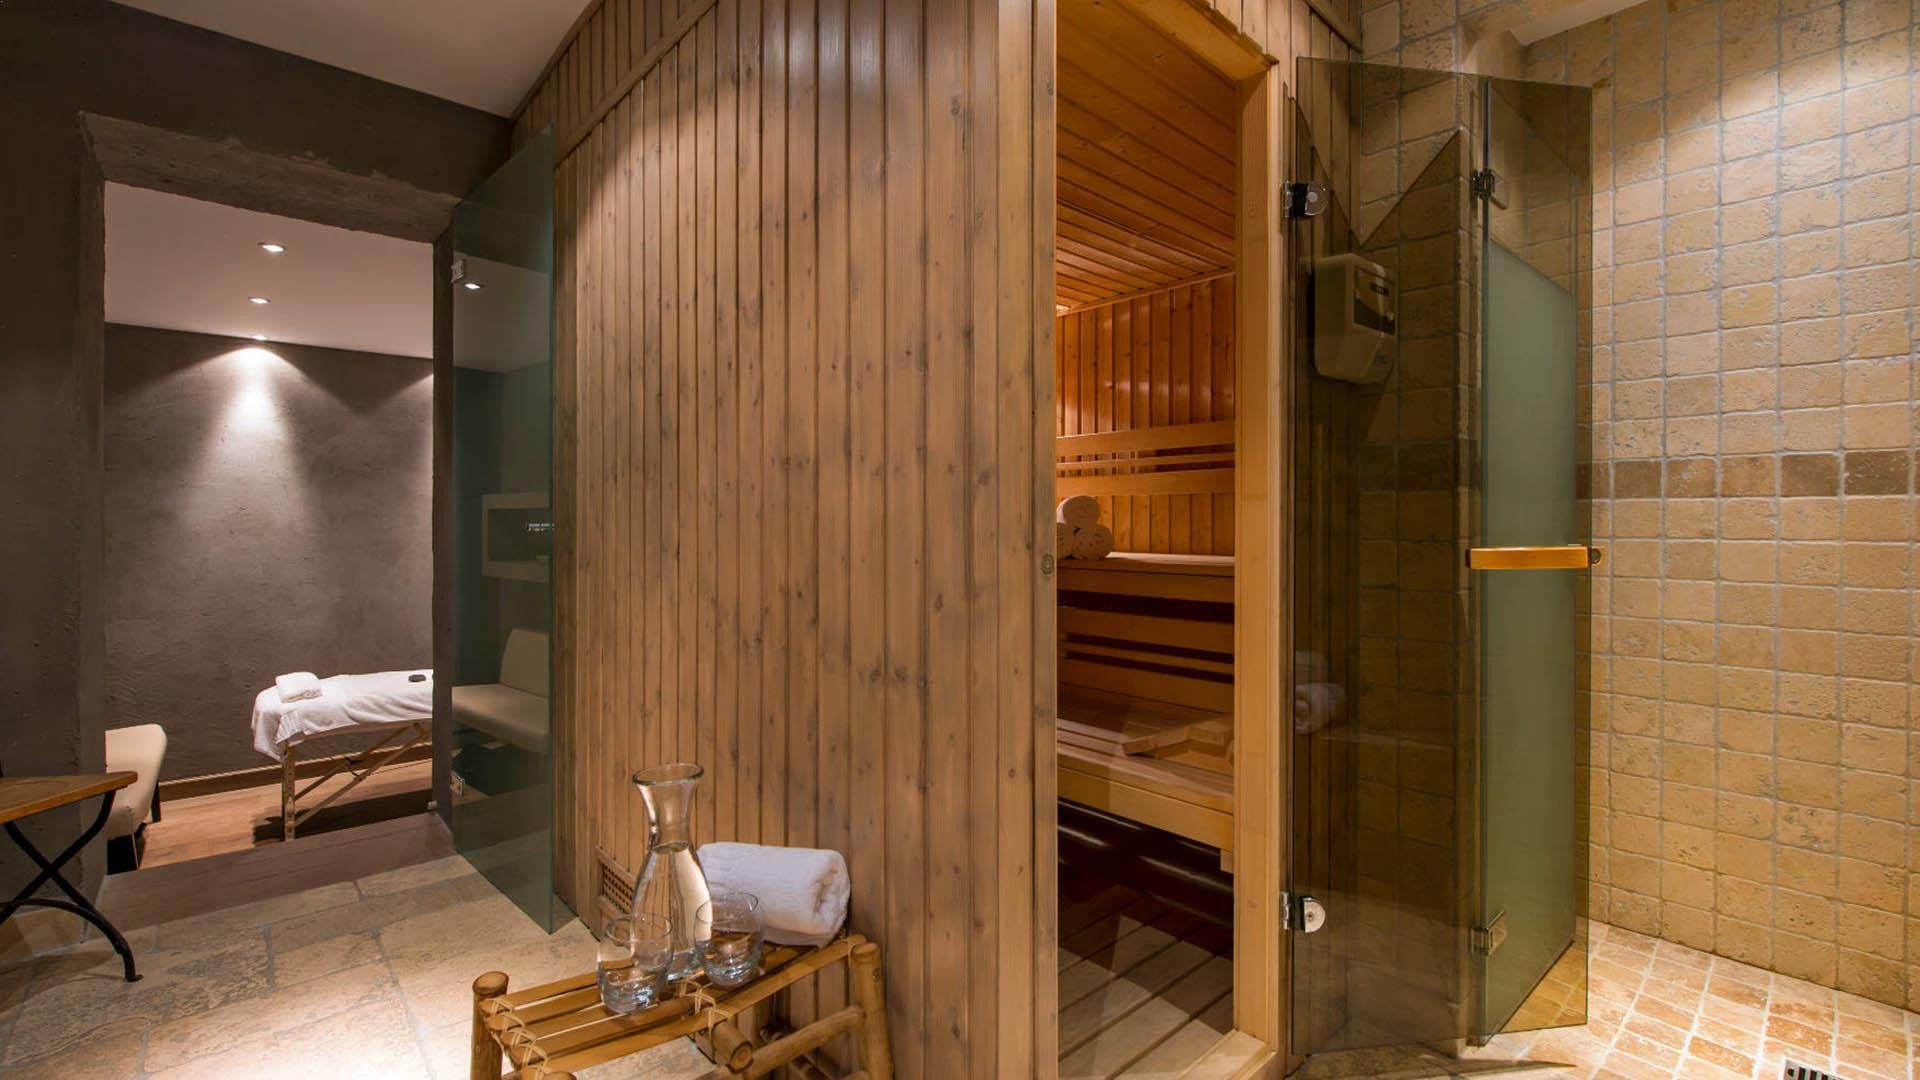 Location Chalet Verbier Luxe Vicanite Spa